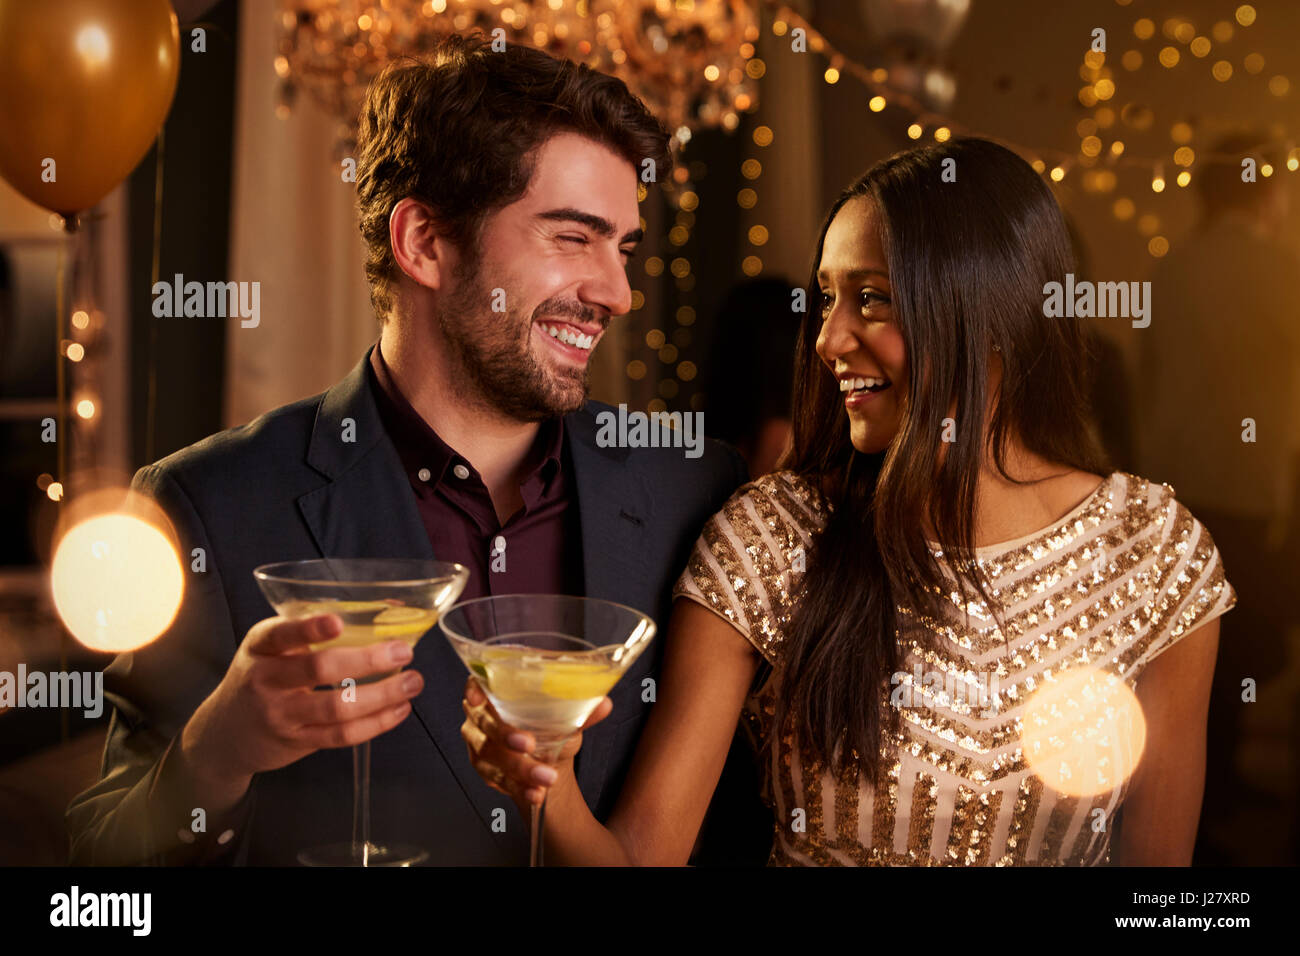 Couple Make Toast As They Celebrate At Party Together Stock Photo